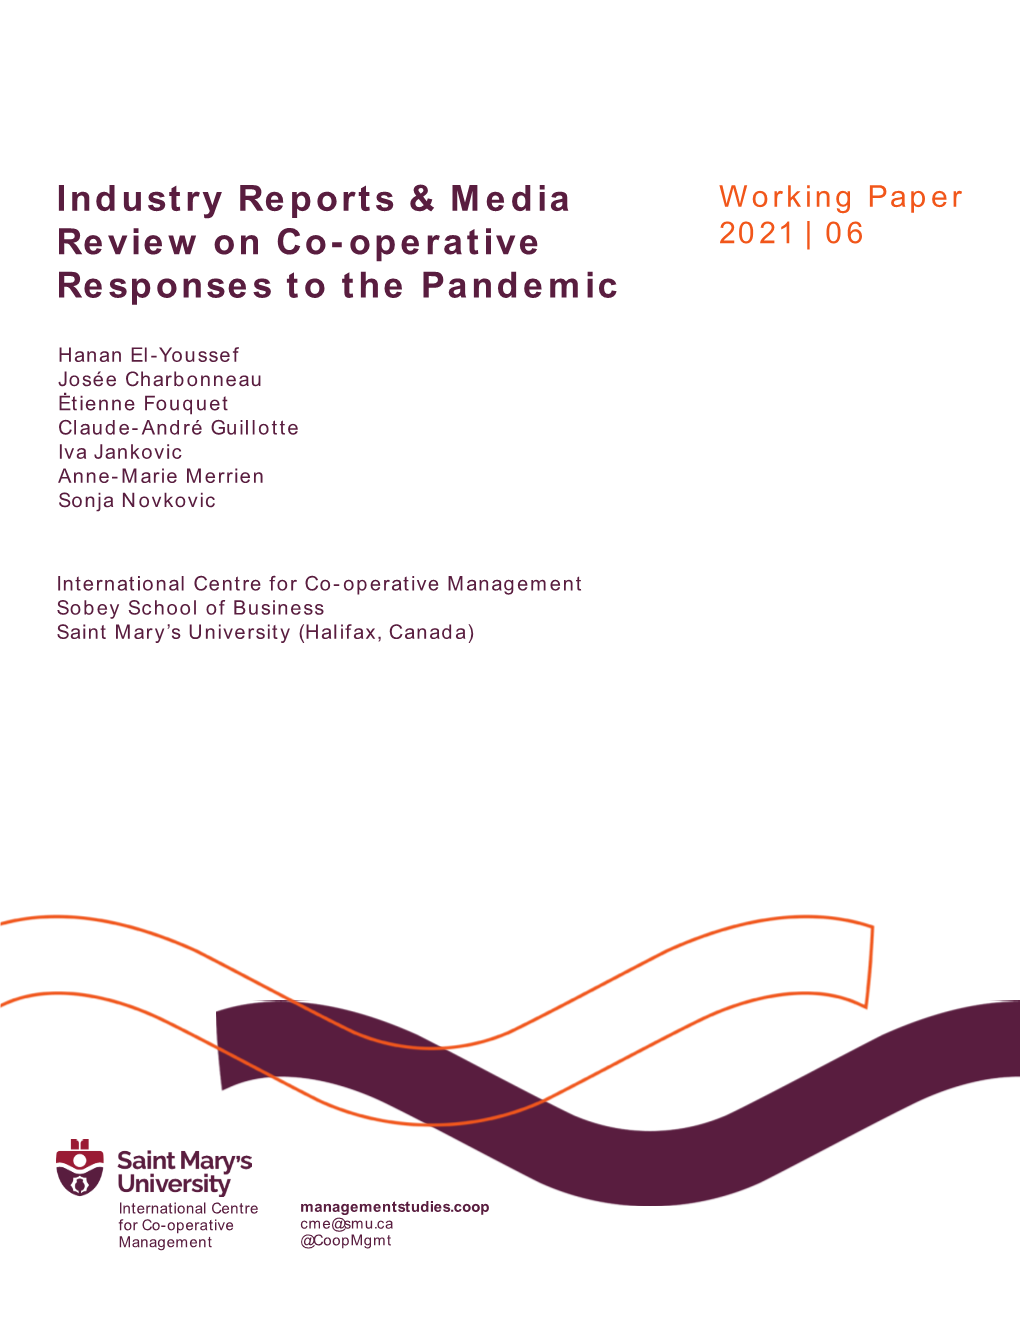 Industry Reports & Media Review on Co-Operative Responses to The